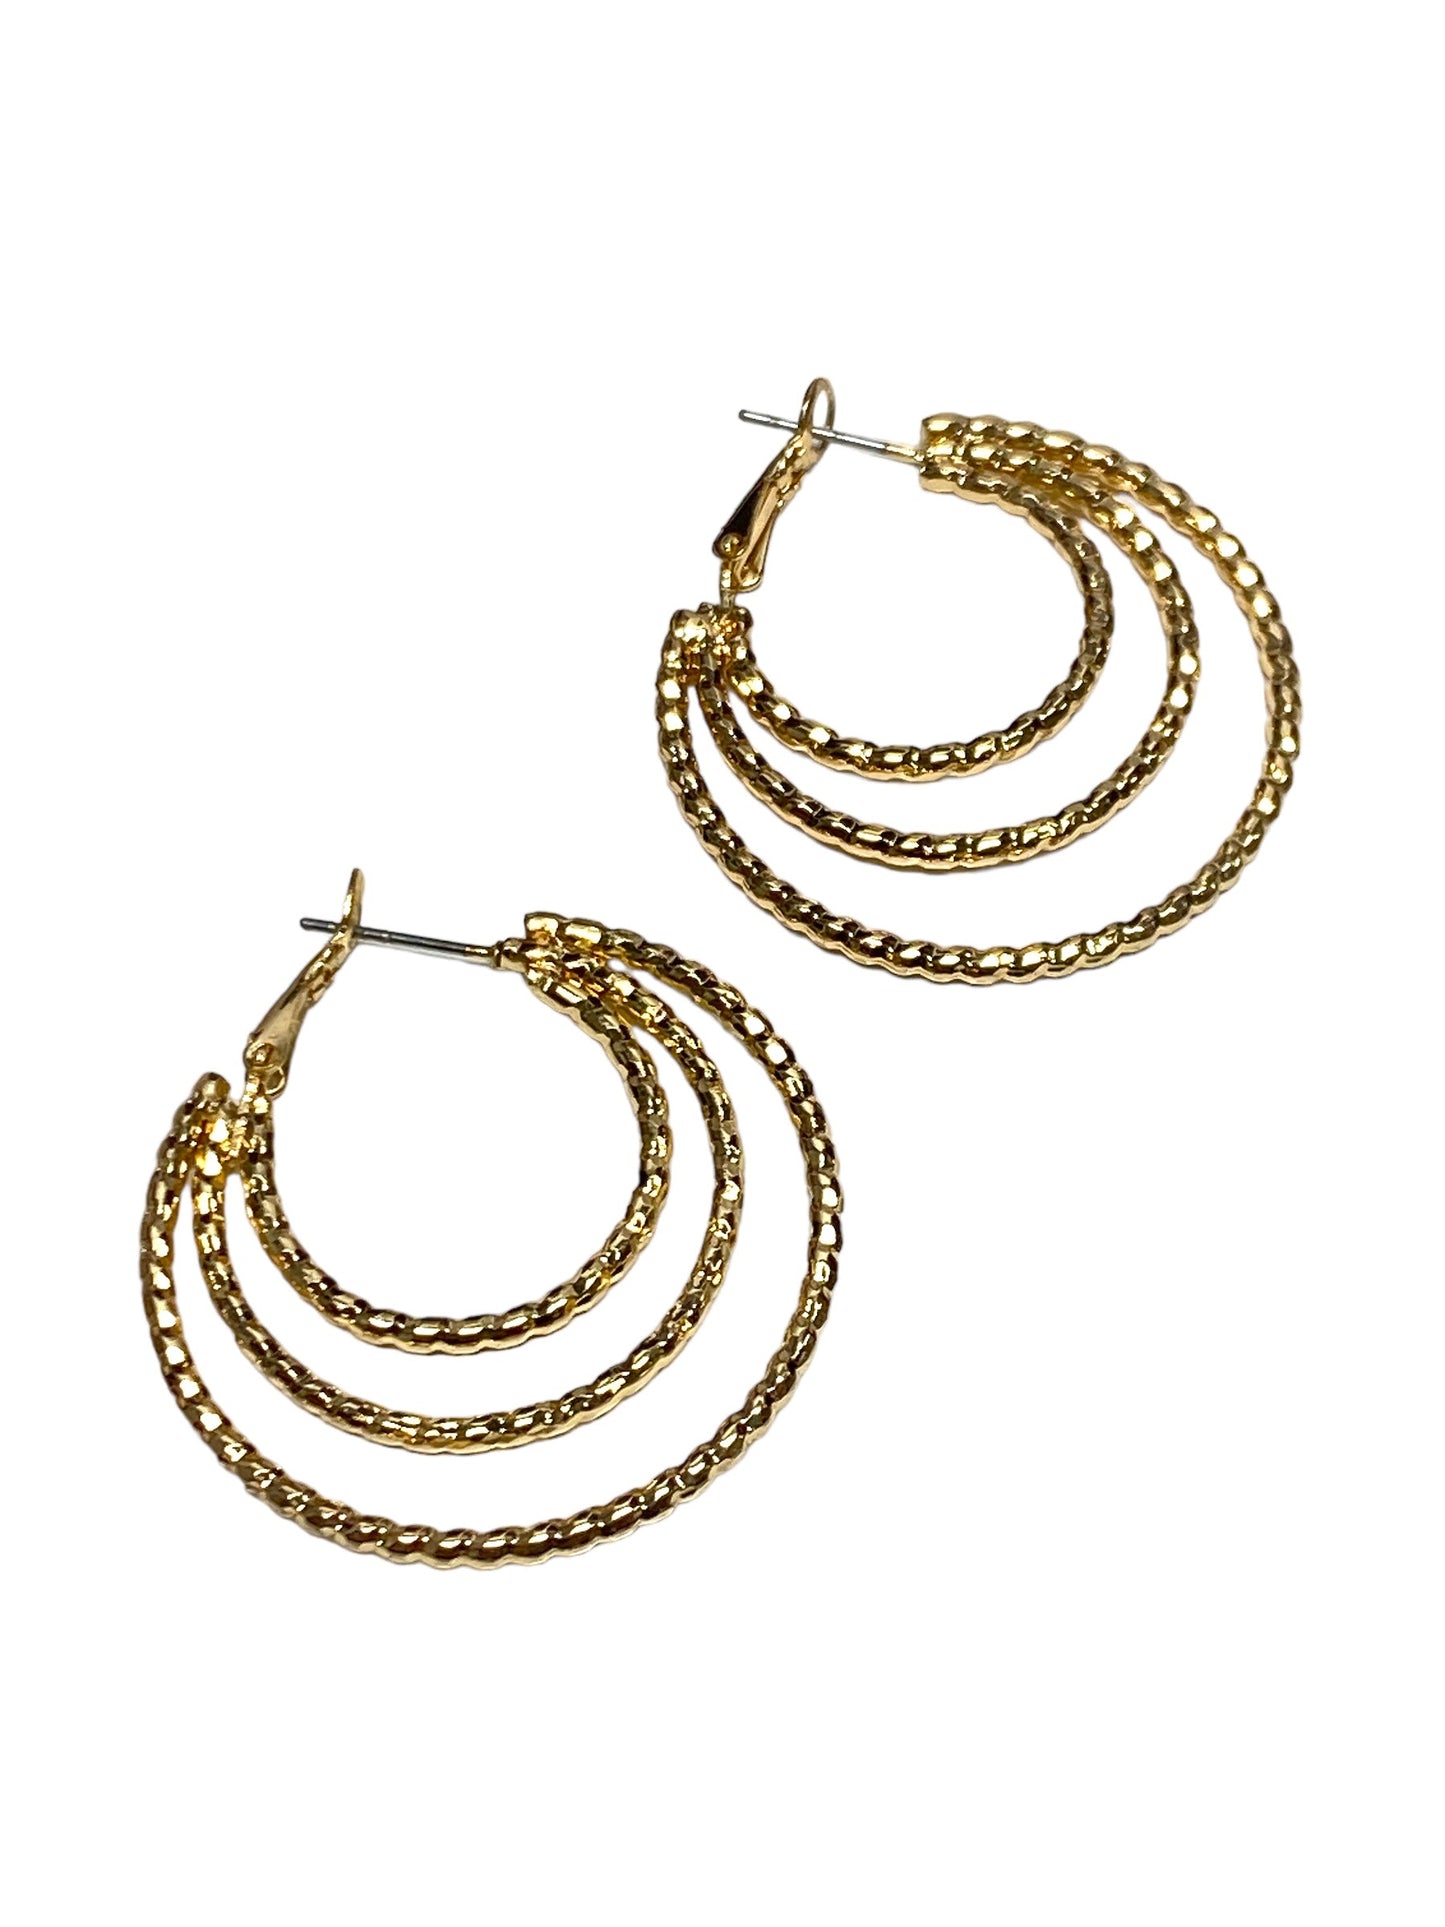 Earrings Hoop Clothes Mentor, Size 02 Piece Set